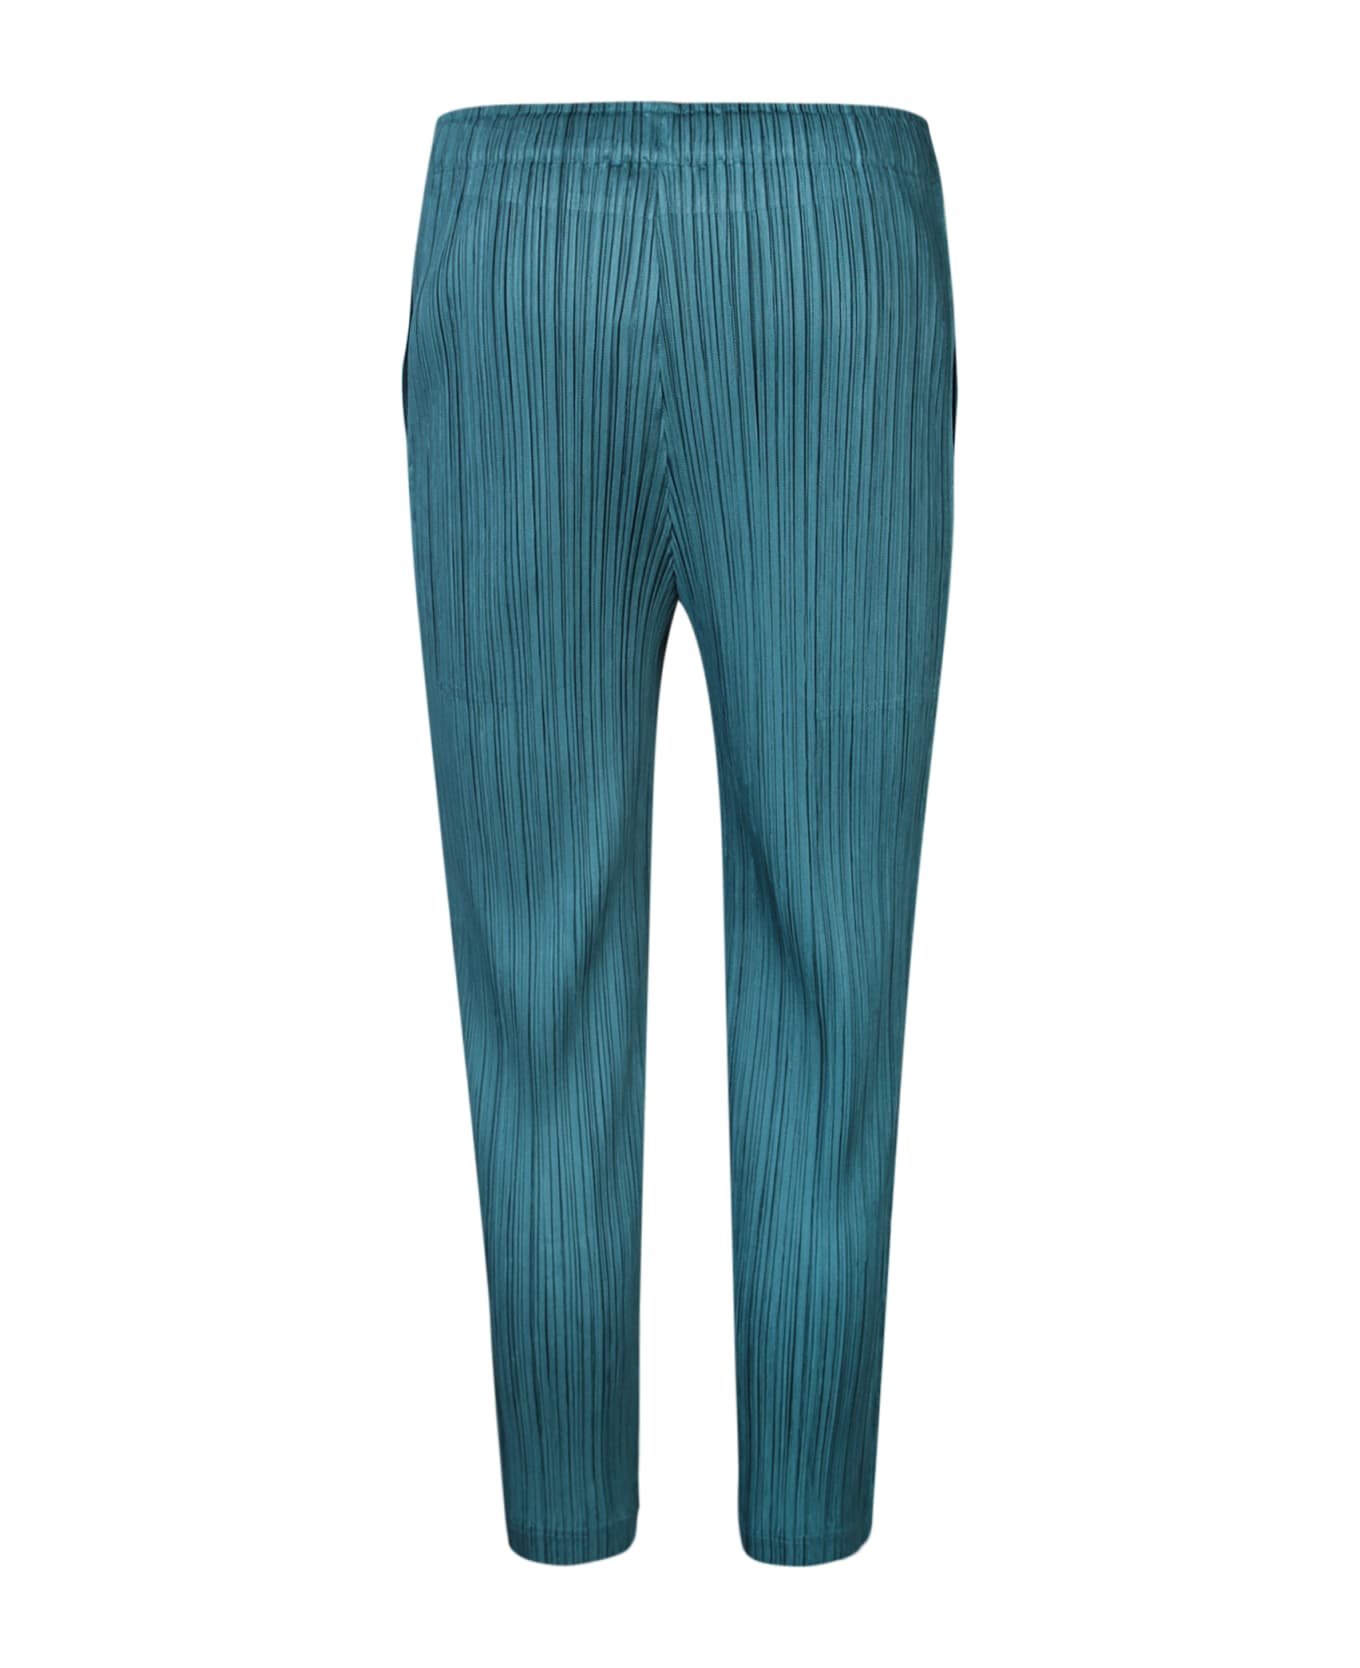 Issey Miyake Pleated Petrol Green Trousers - Green ボトムス